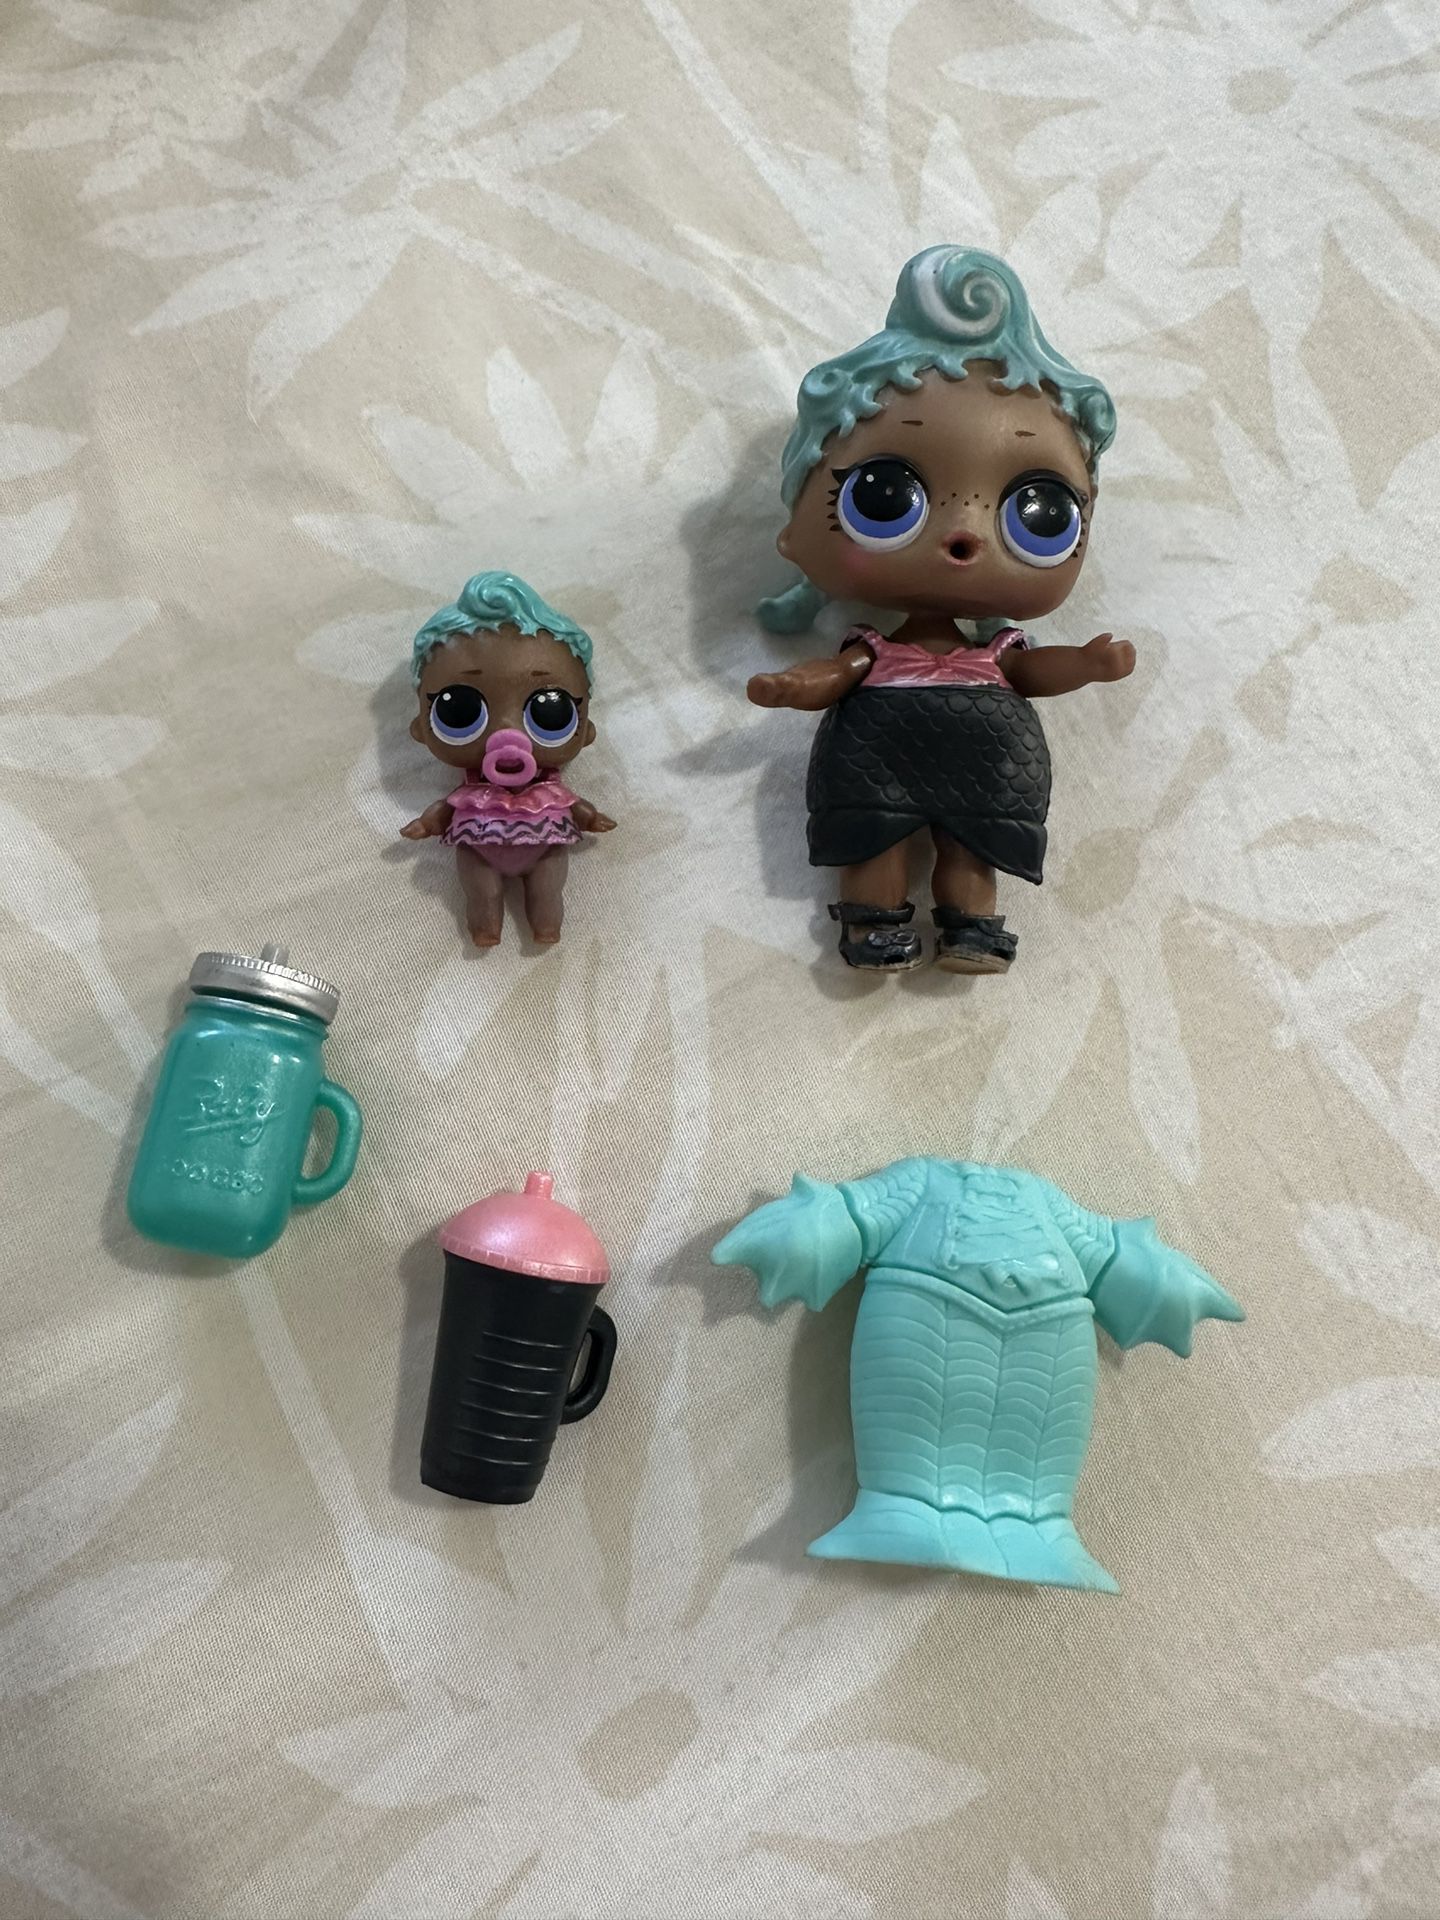 L.O.L. Surprise! 2017 Mermaid 🧜‍♀️ Dolls big sister and little sister